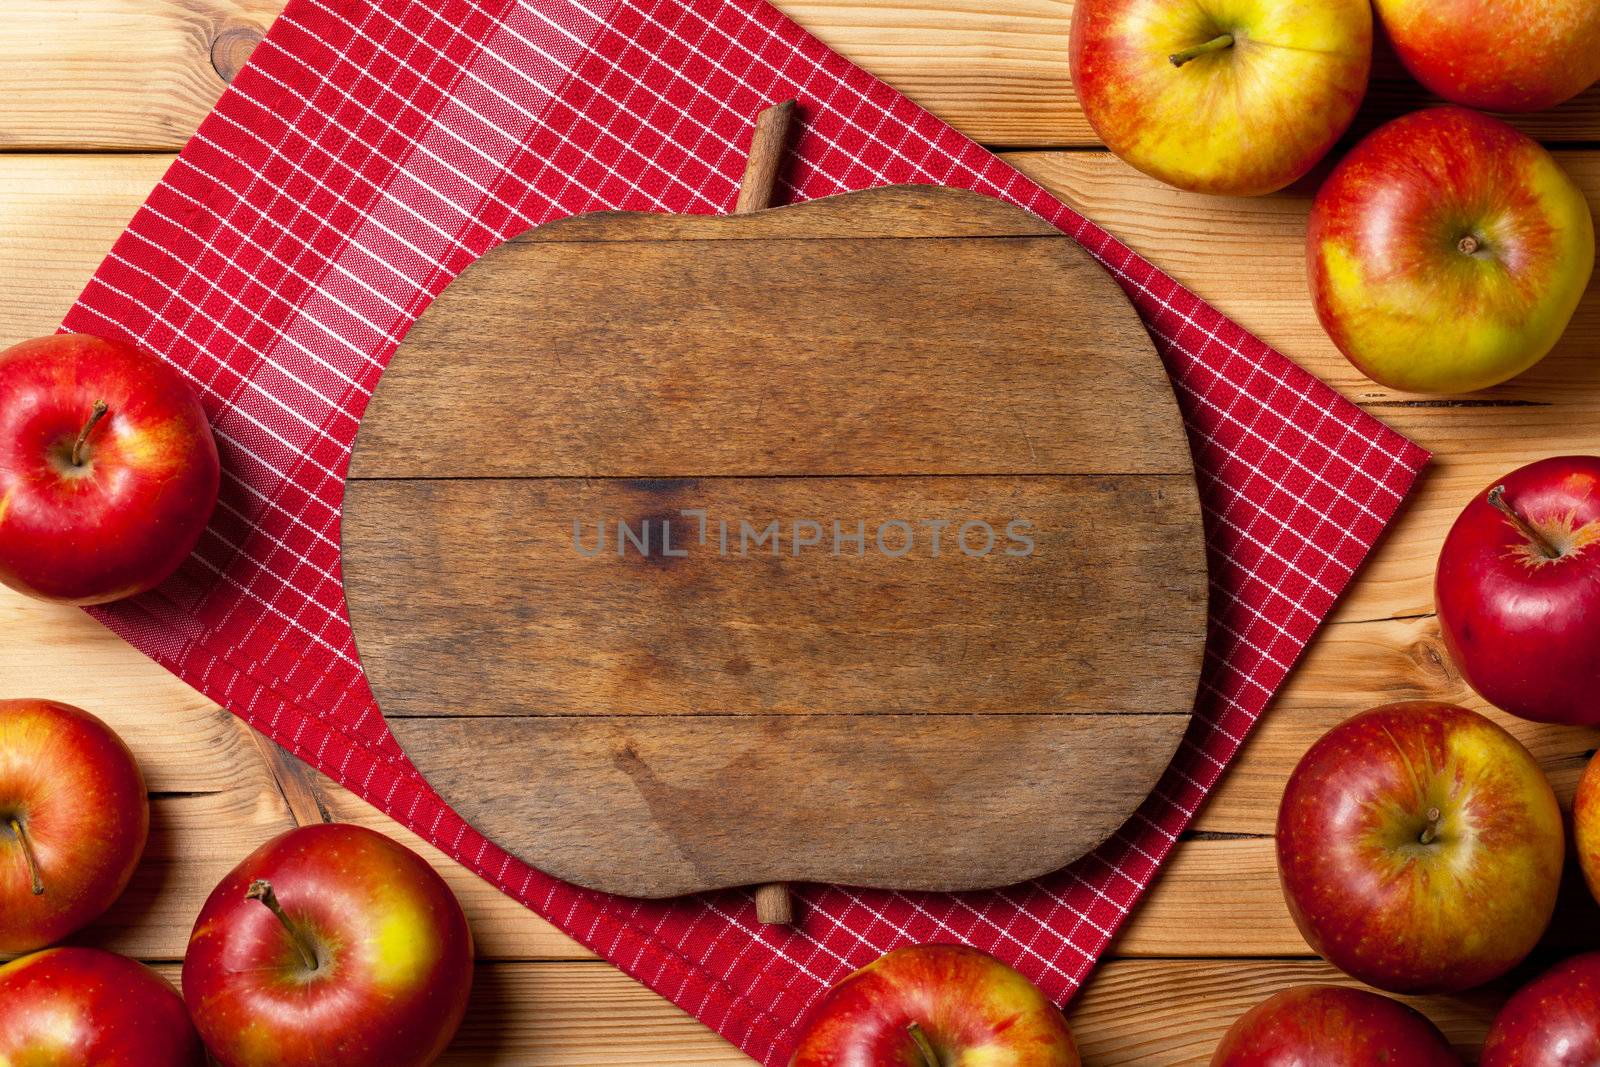 Fresh apples on wooden background. Composition with fruits and cutting board with apple shape. Copy space